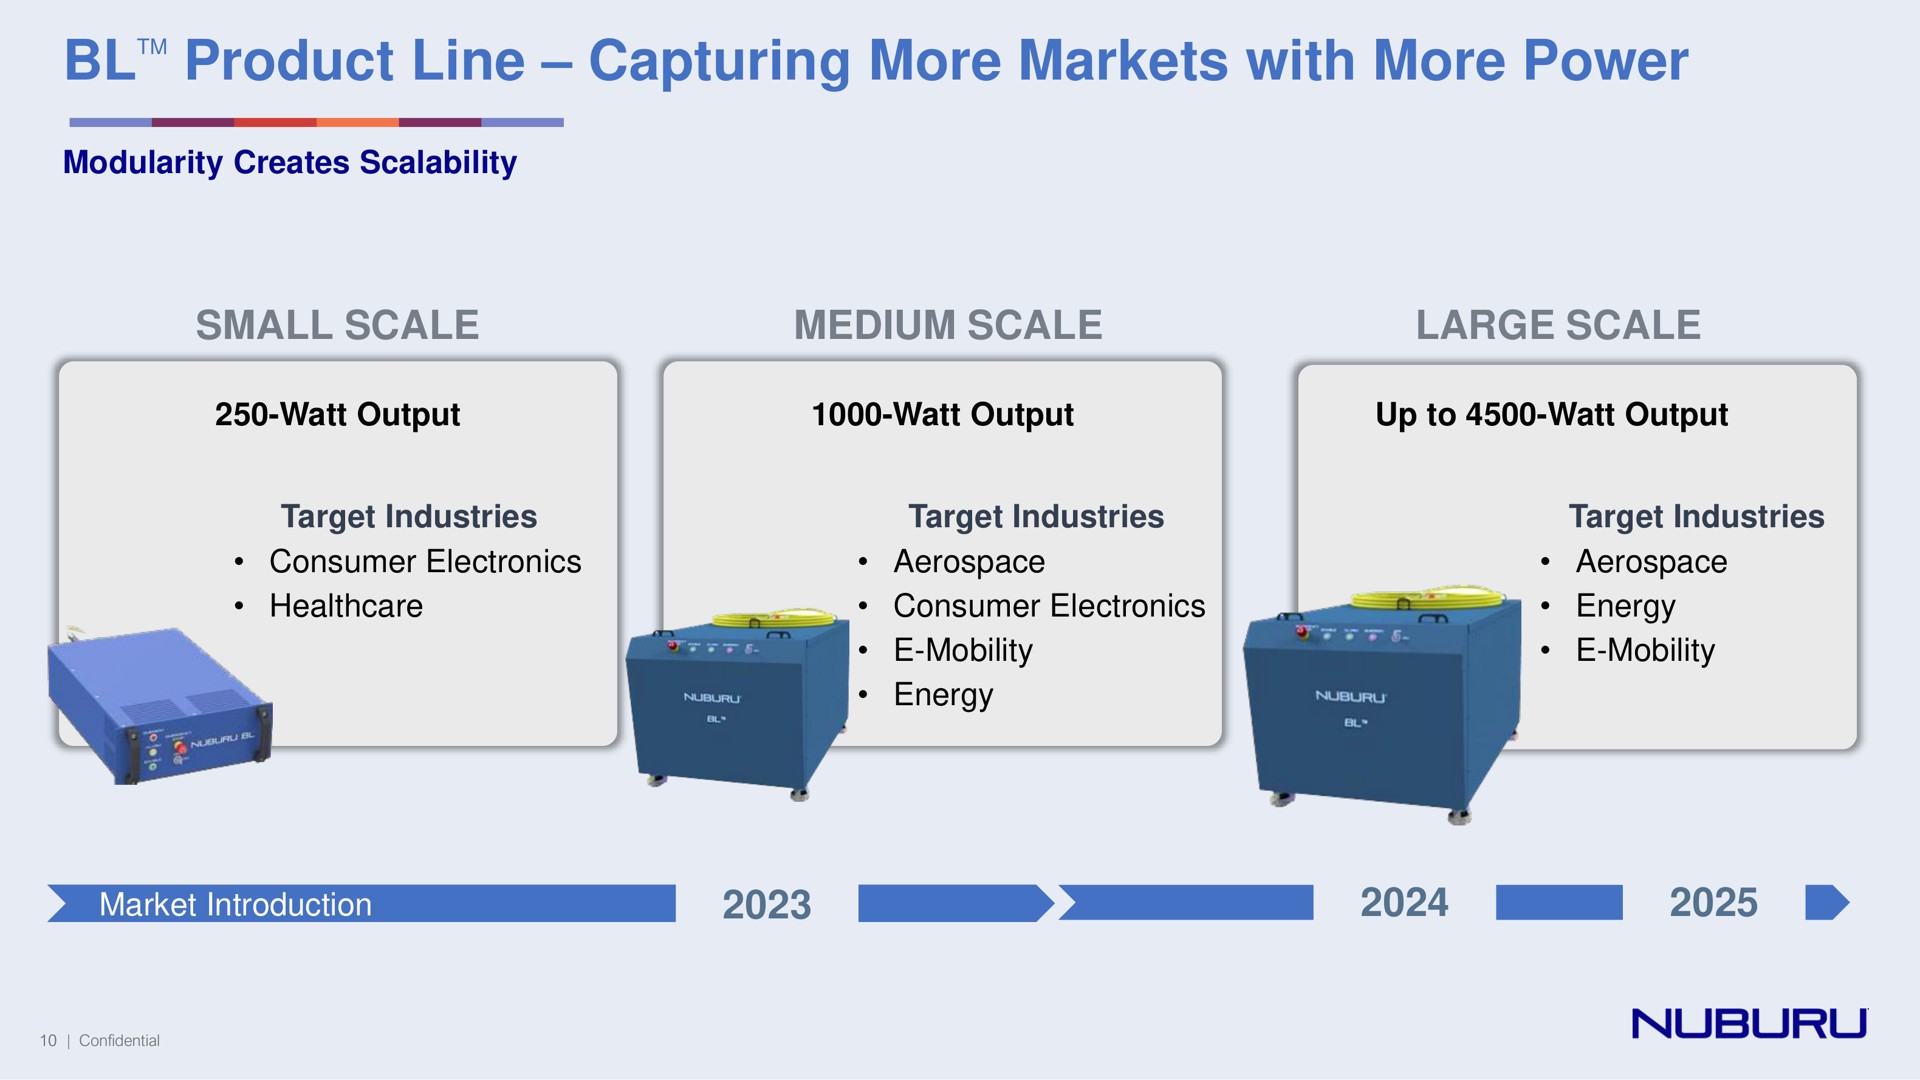 product line capturing more markets with more power creates small scale medium scale large scale watt output watt output up to watt output target industries consumer electronics target industries consumer electronics mobility energy target industries energy mobility market introduction | NUBURU